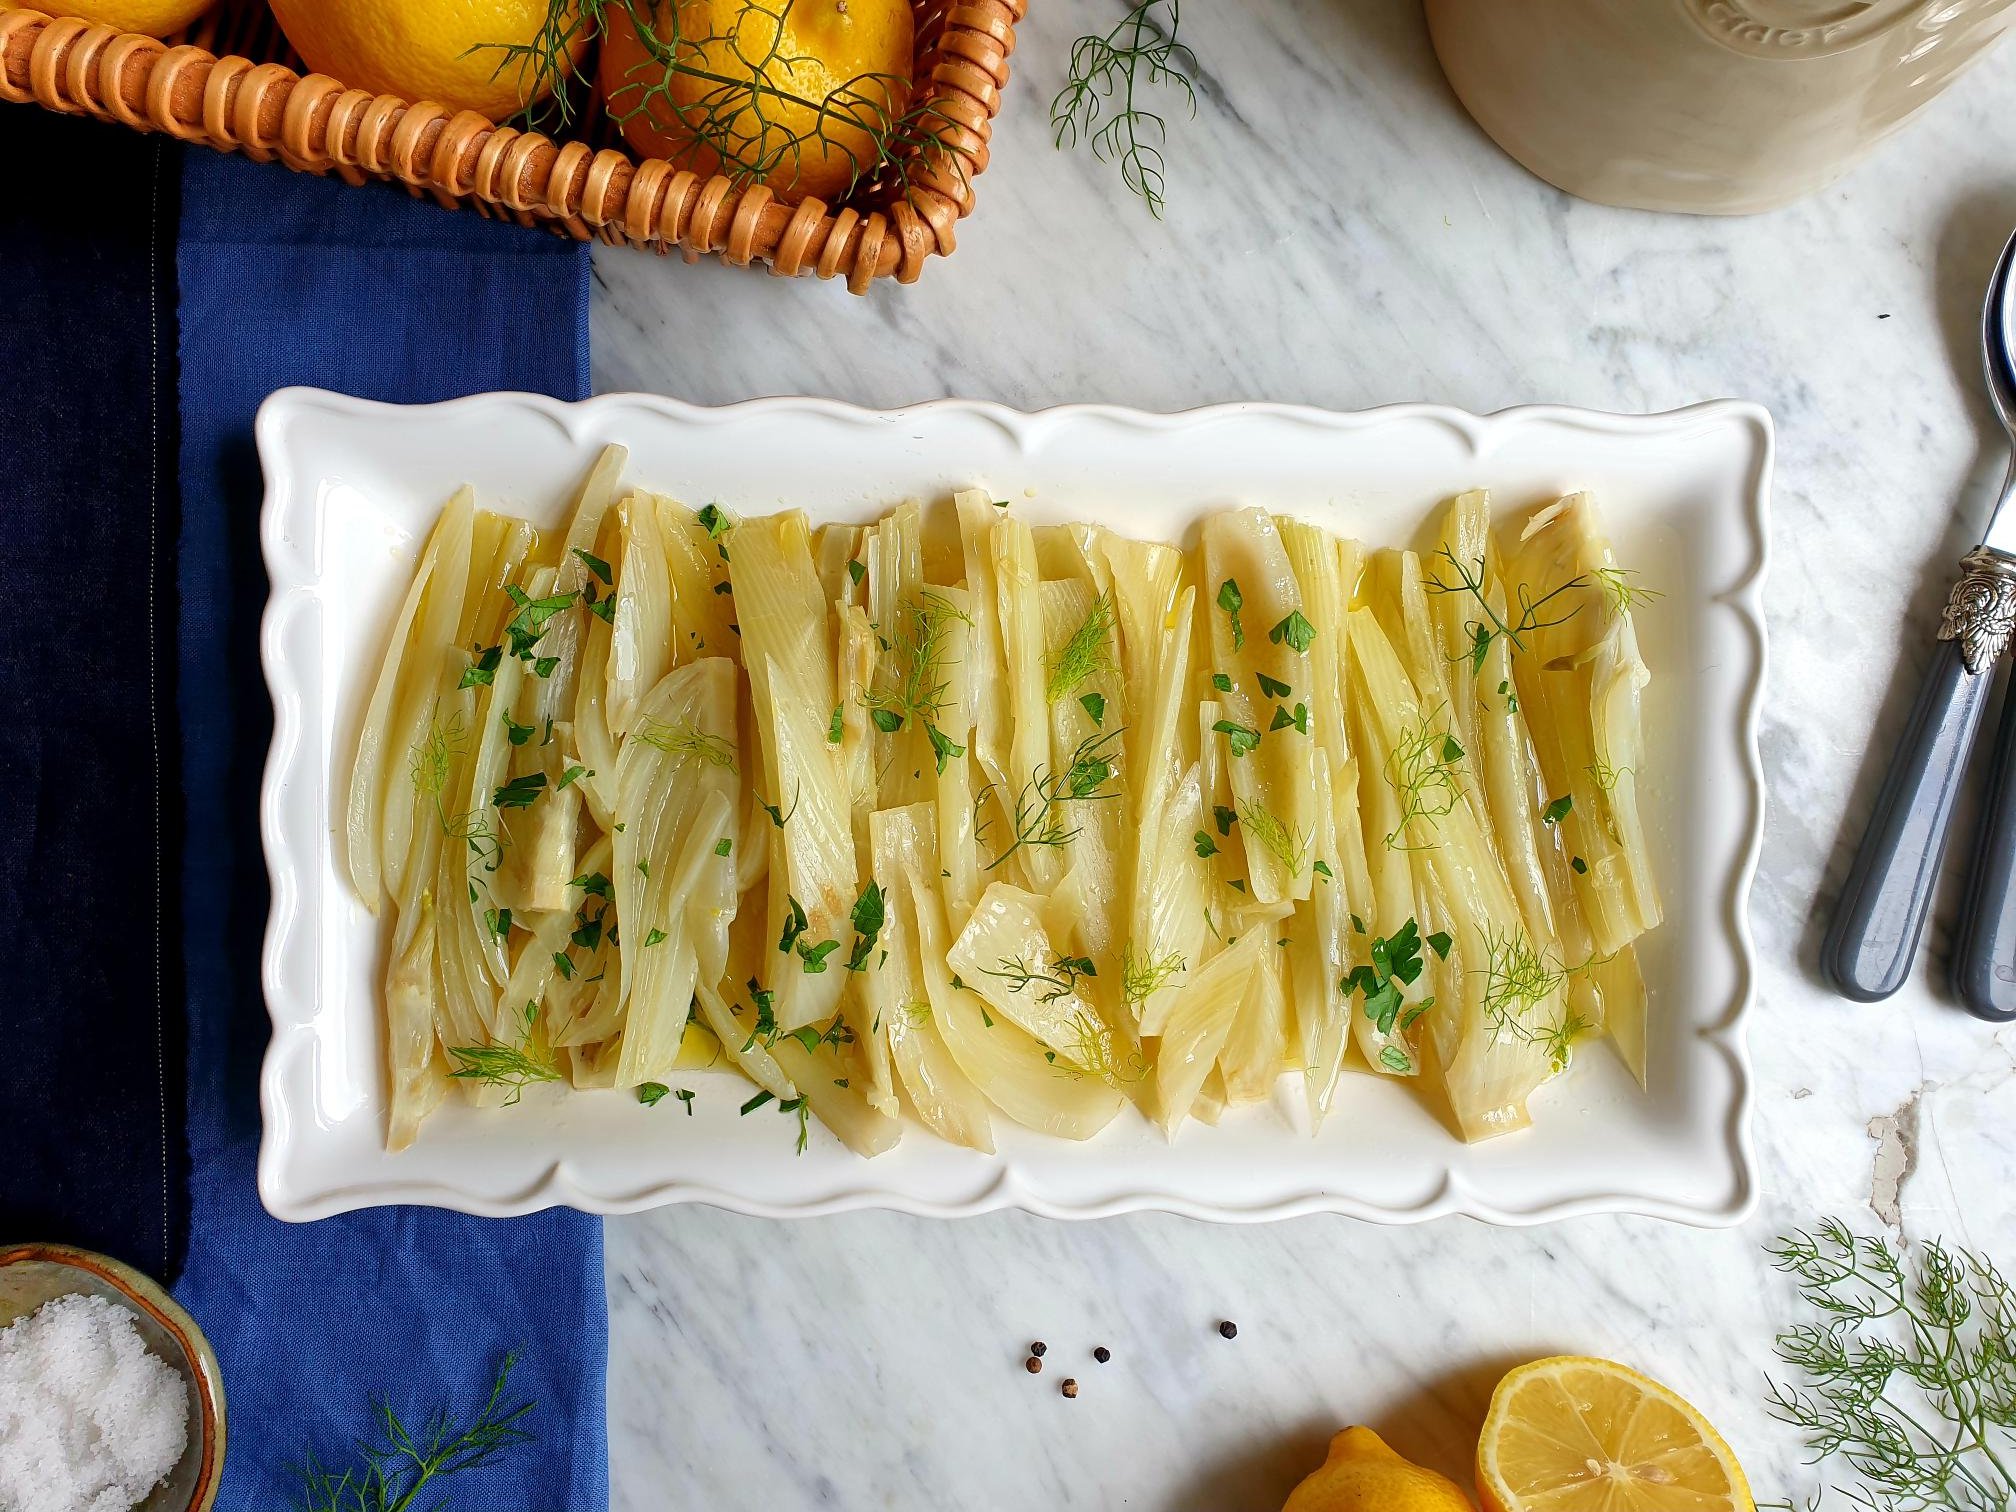 Cooked fennel salad with lemon and olive oil dressing Istrian recipe